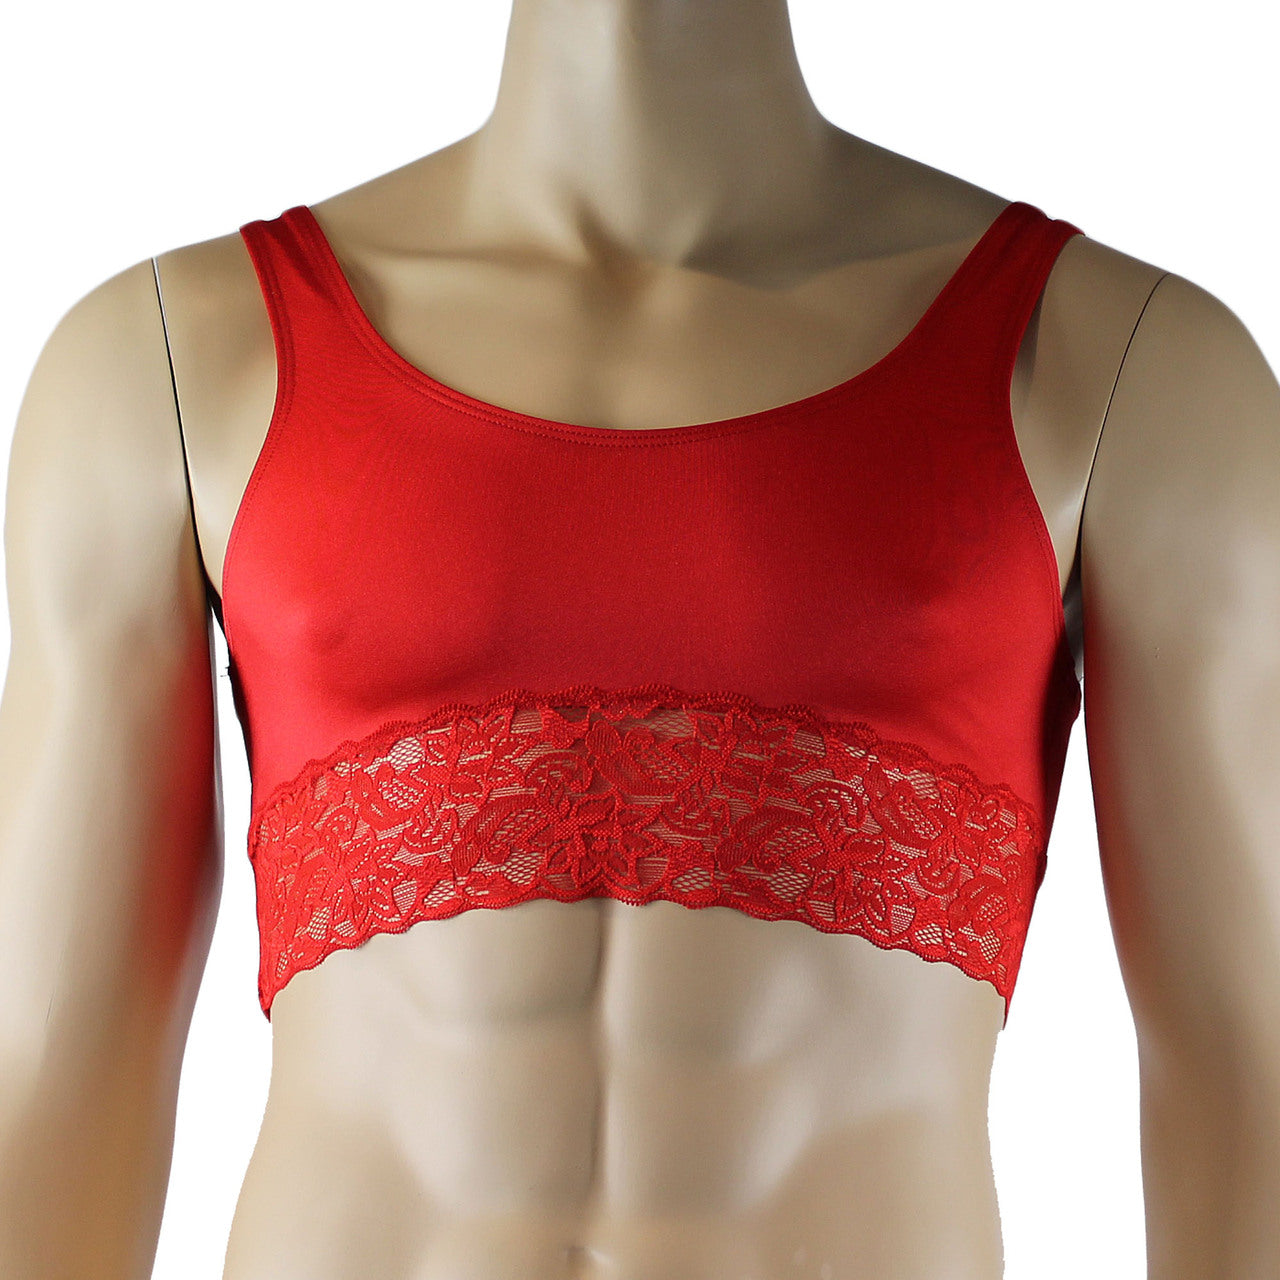 Male Penny Lingerie Bra Camisole Top with Lace Red